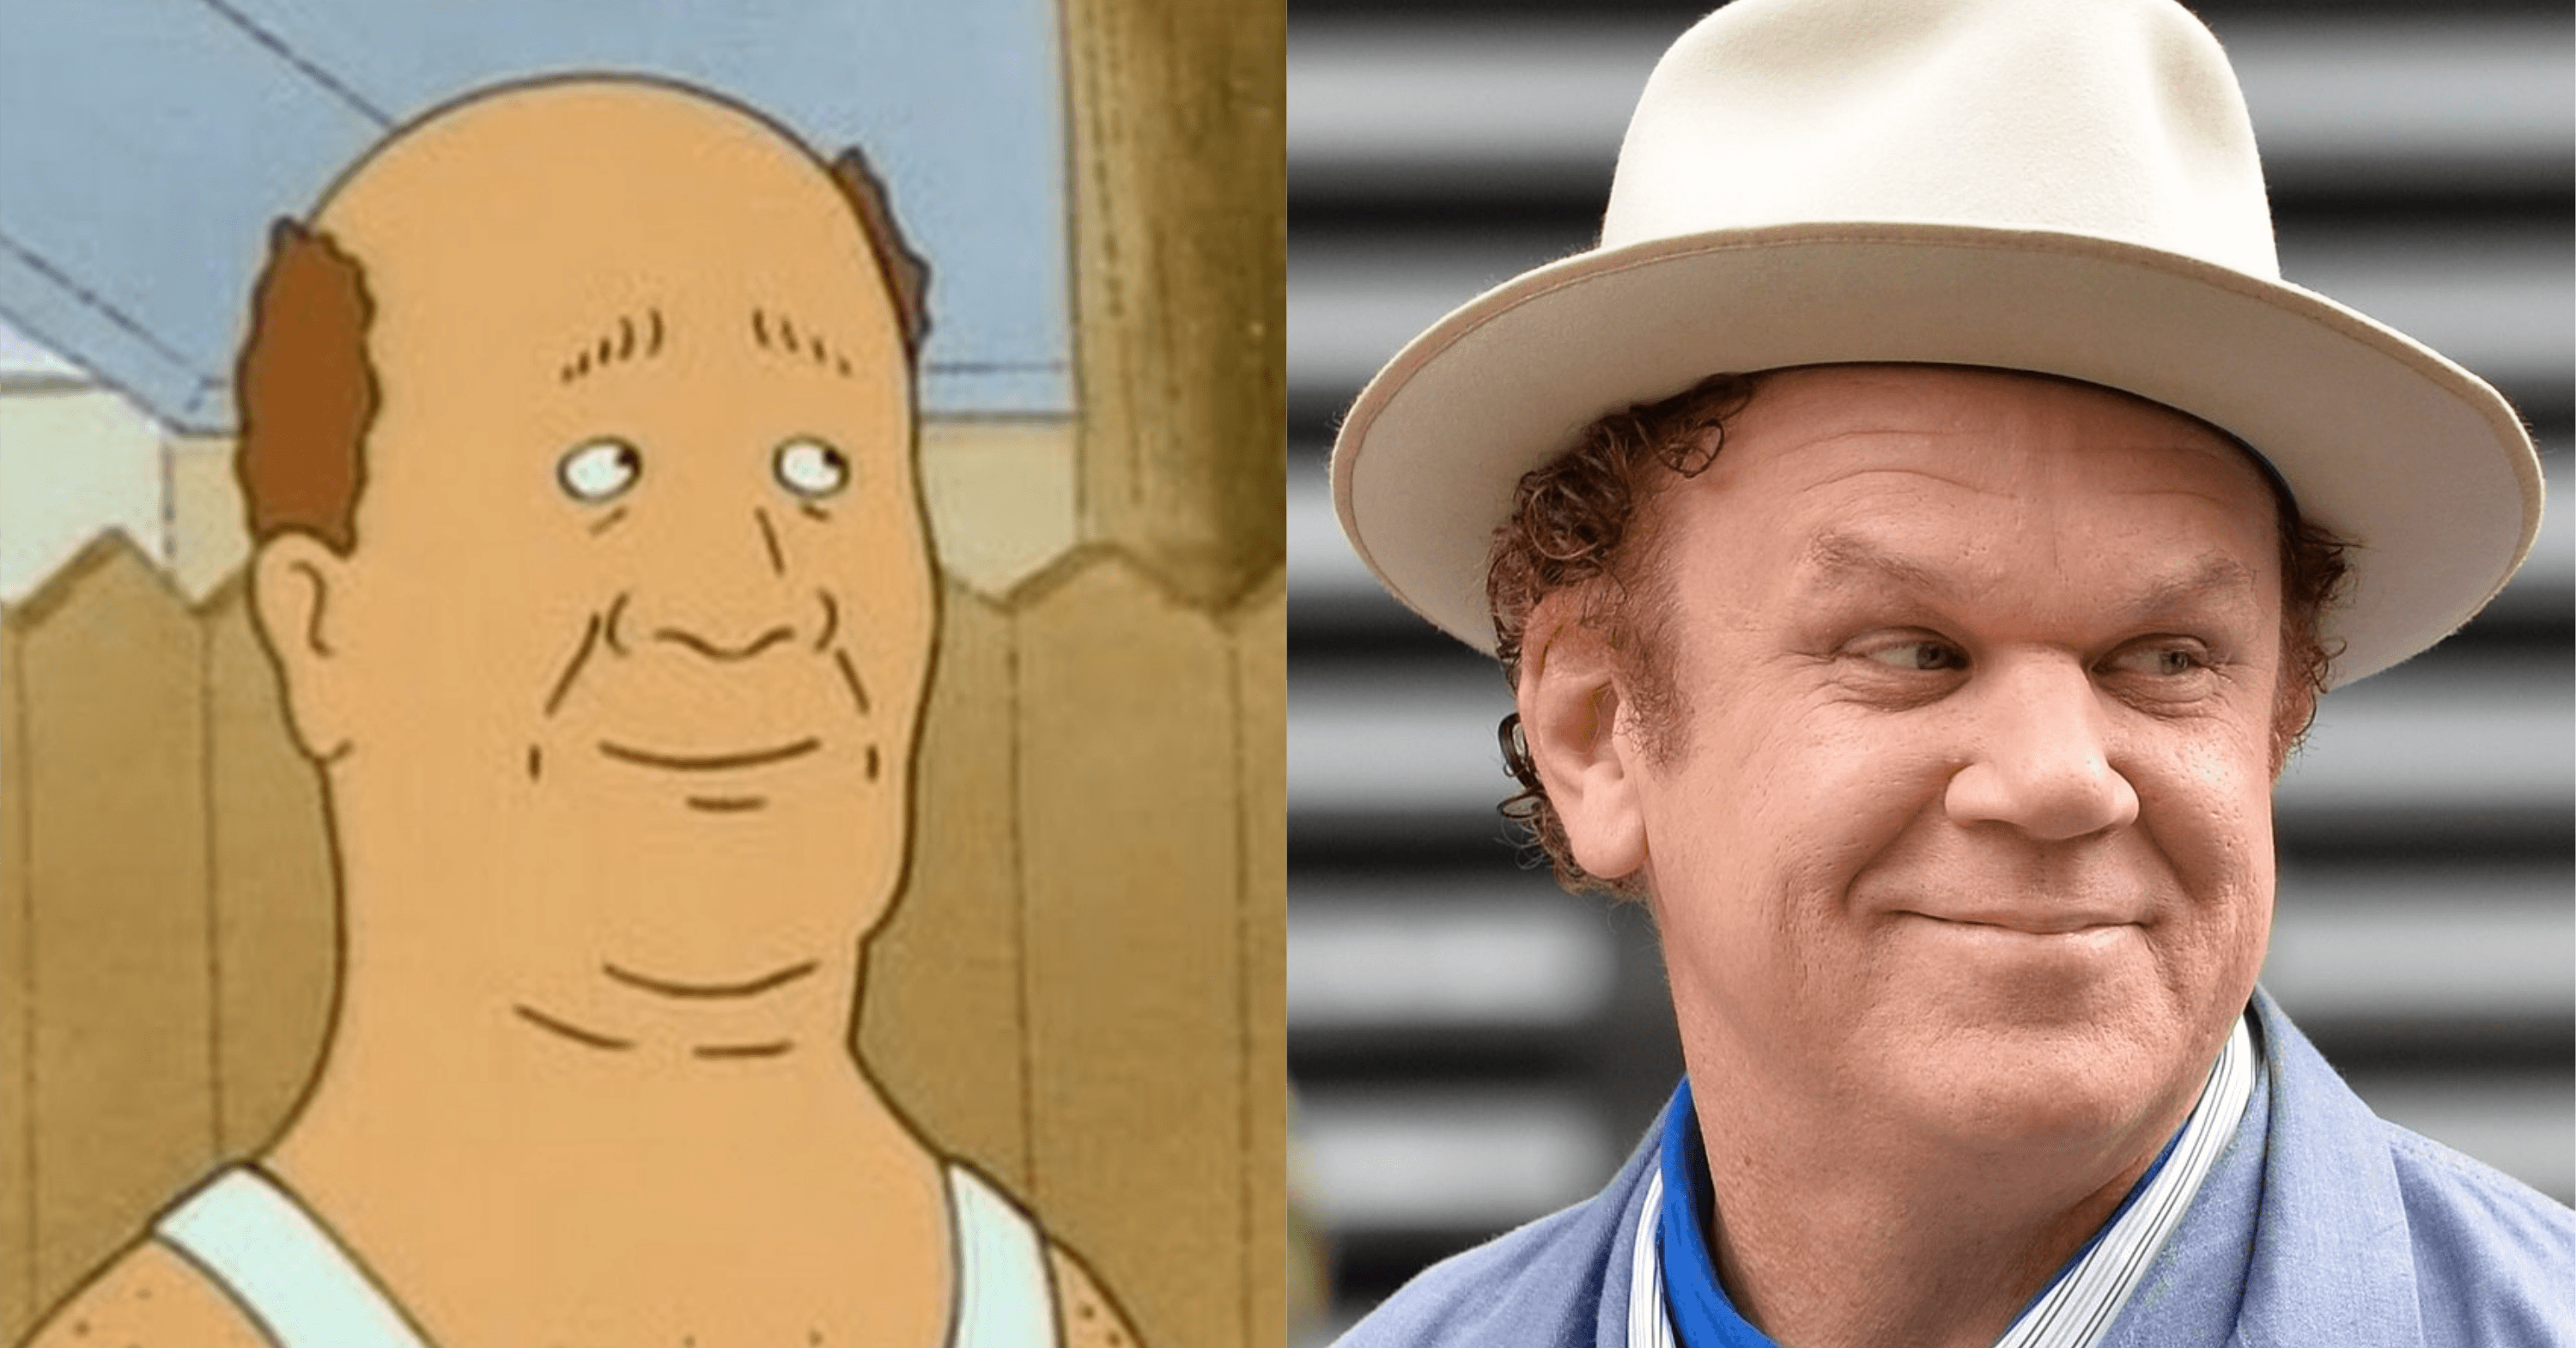 Who Would Star In A LiveAction 'King Of The Hill' Movie?